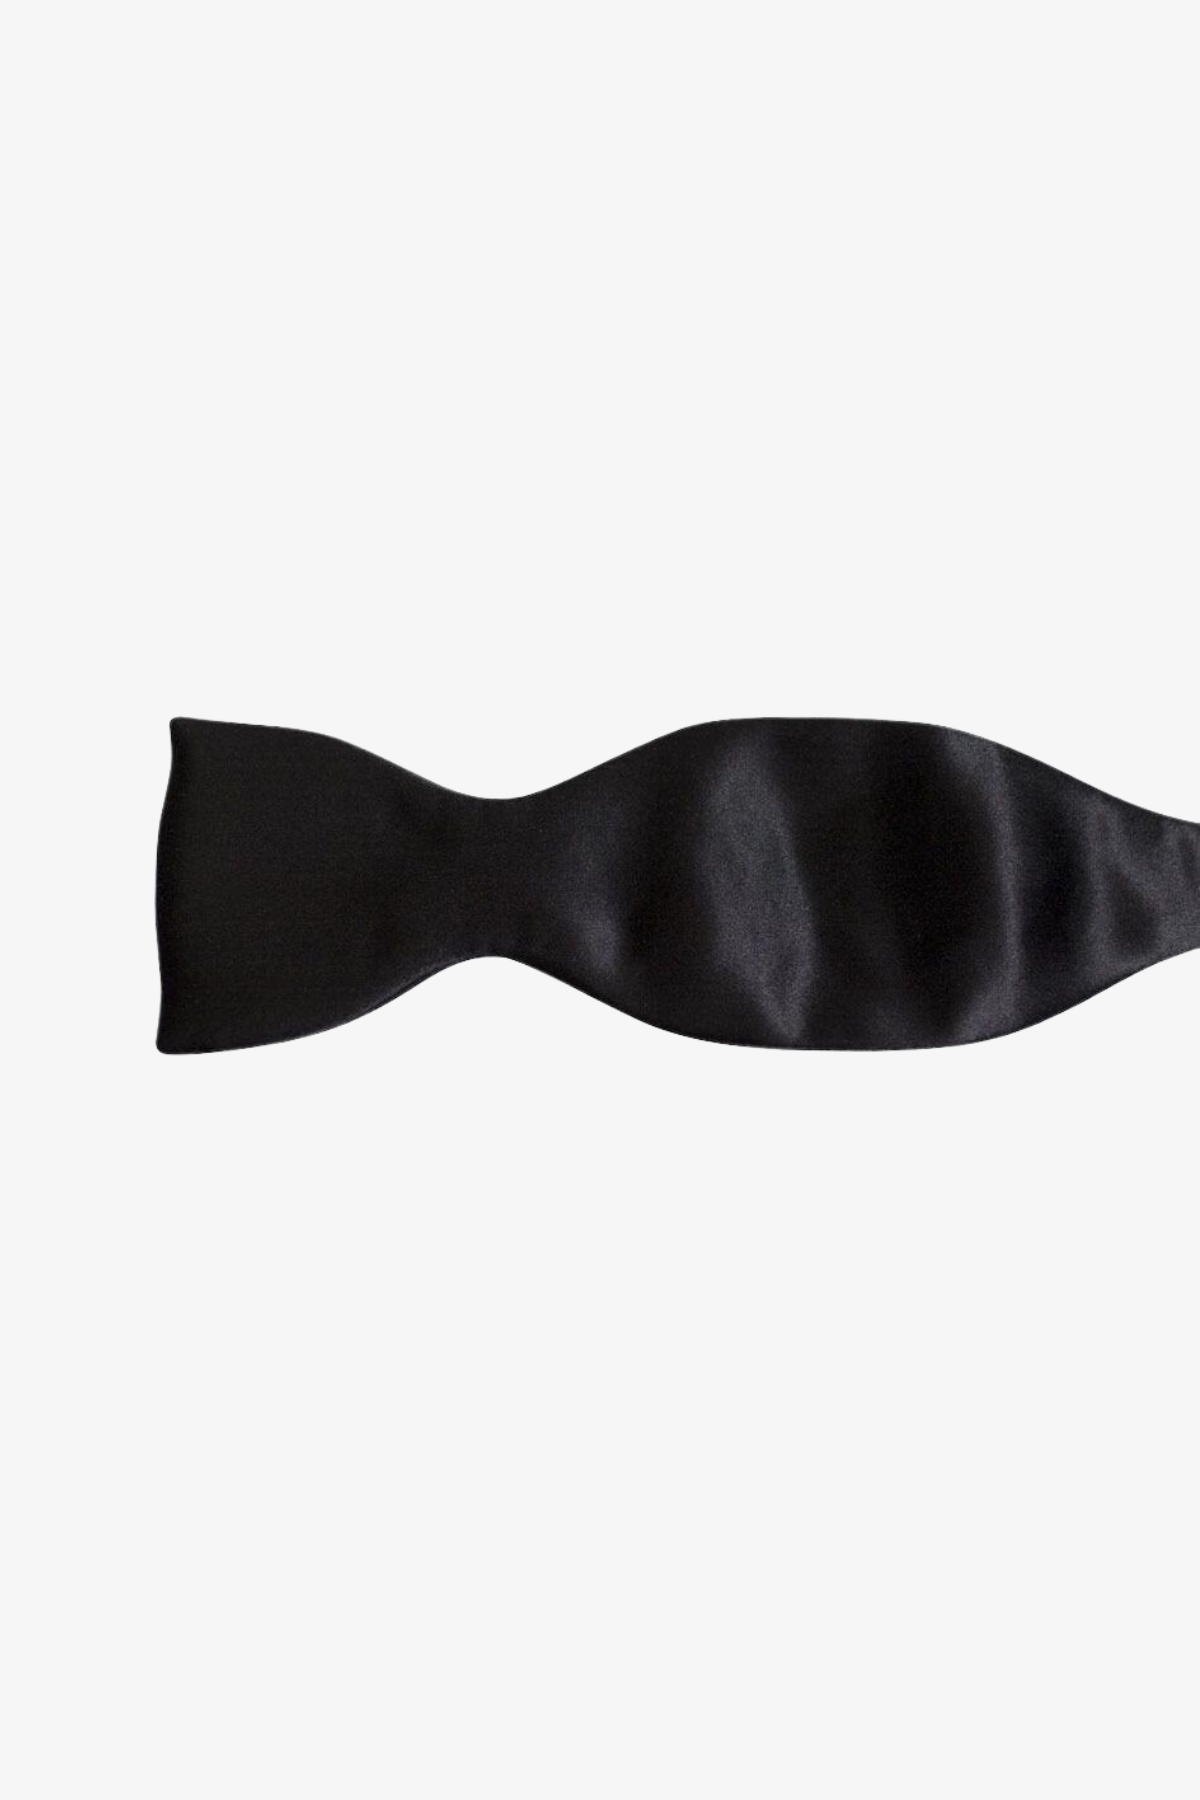 Tie your own bow tie